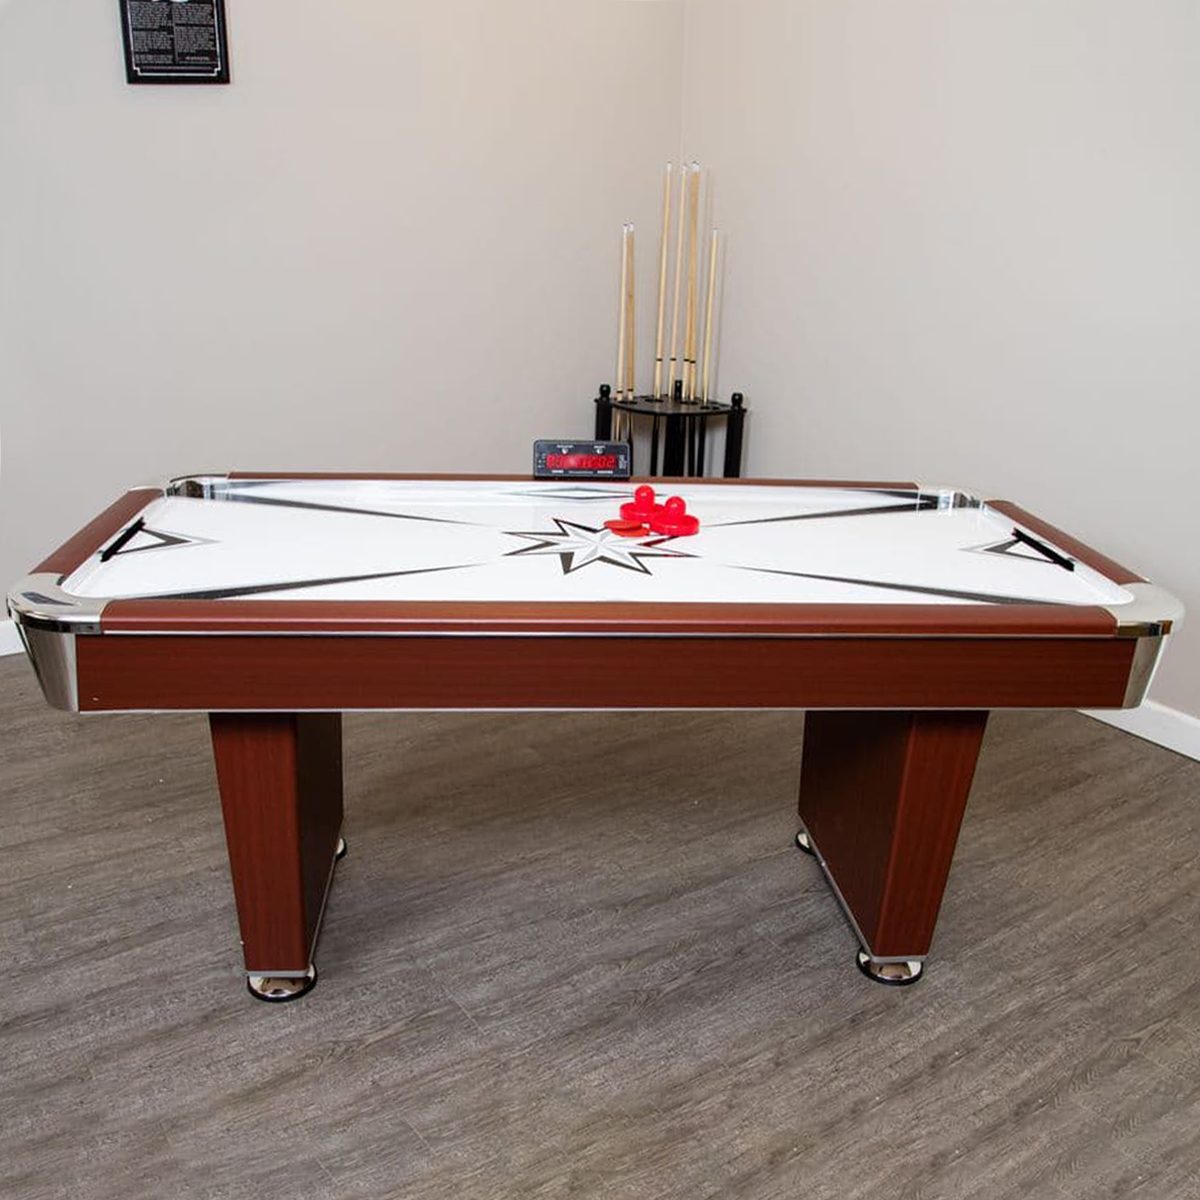 How to Efficiently Clean Your Air Hockey Table for Optimal Performance